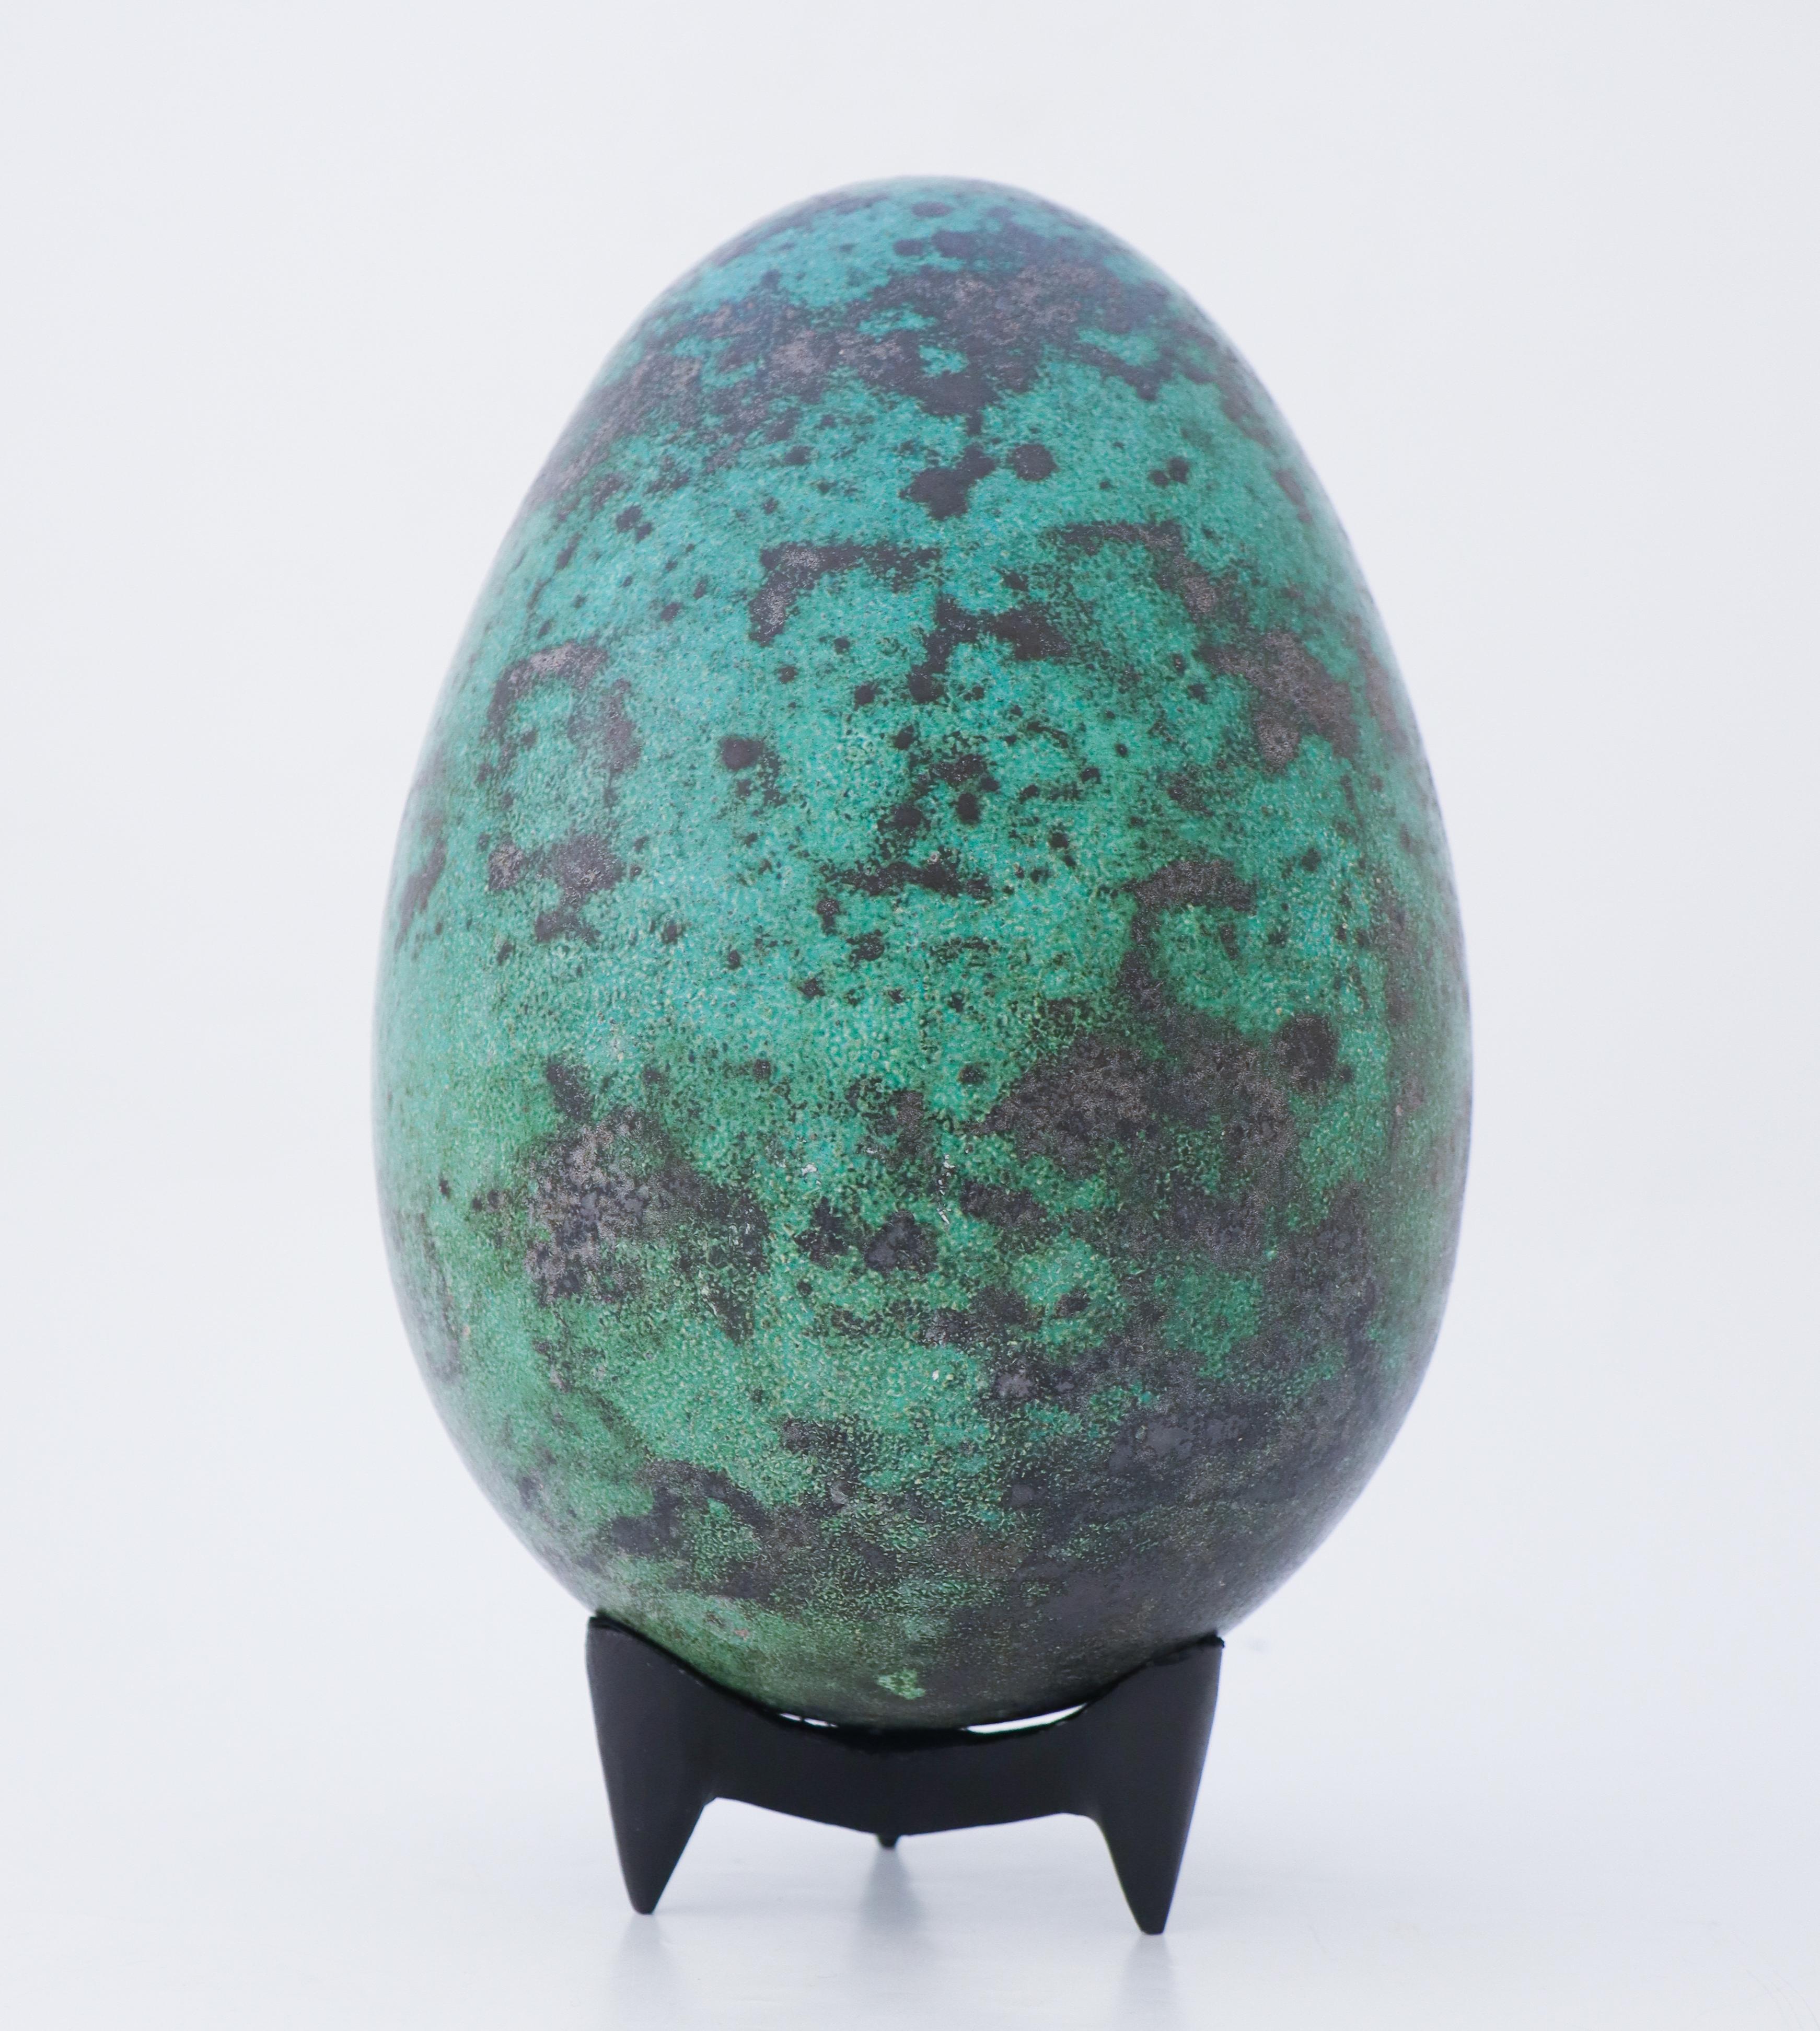 Egg designed by the Swedish ceramicist Hans Hedberg, who lived and worked in Biot, France. This egg is 30 cm (12